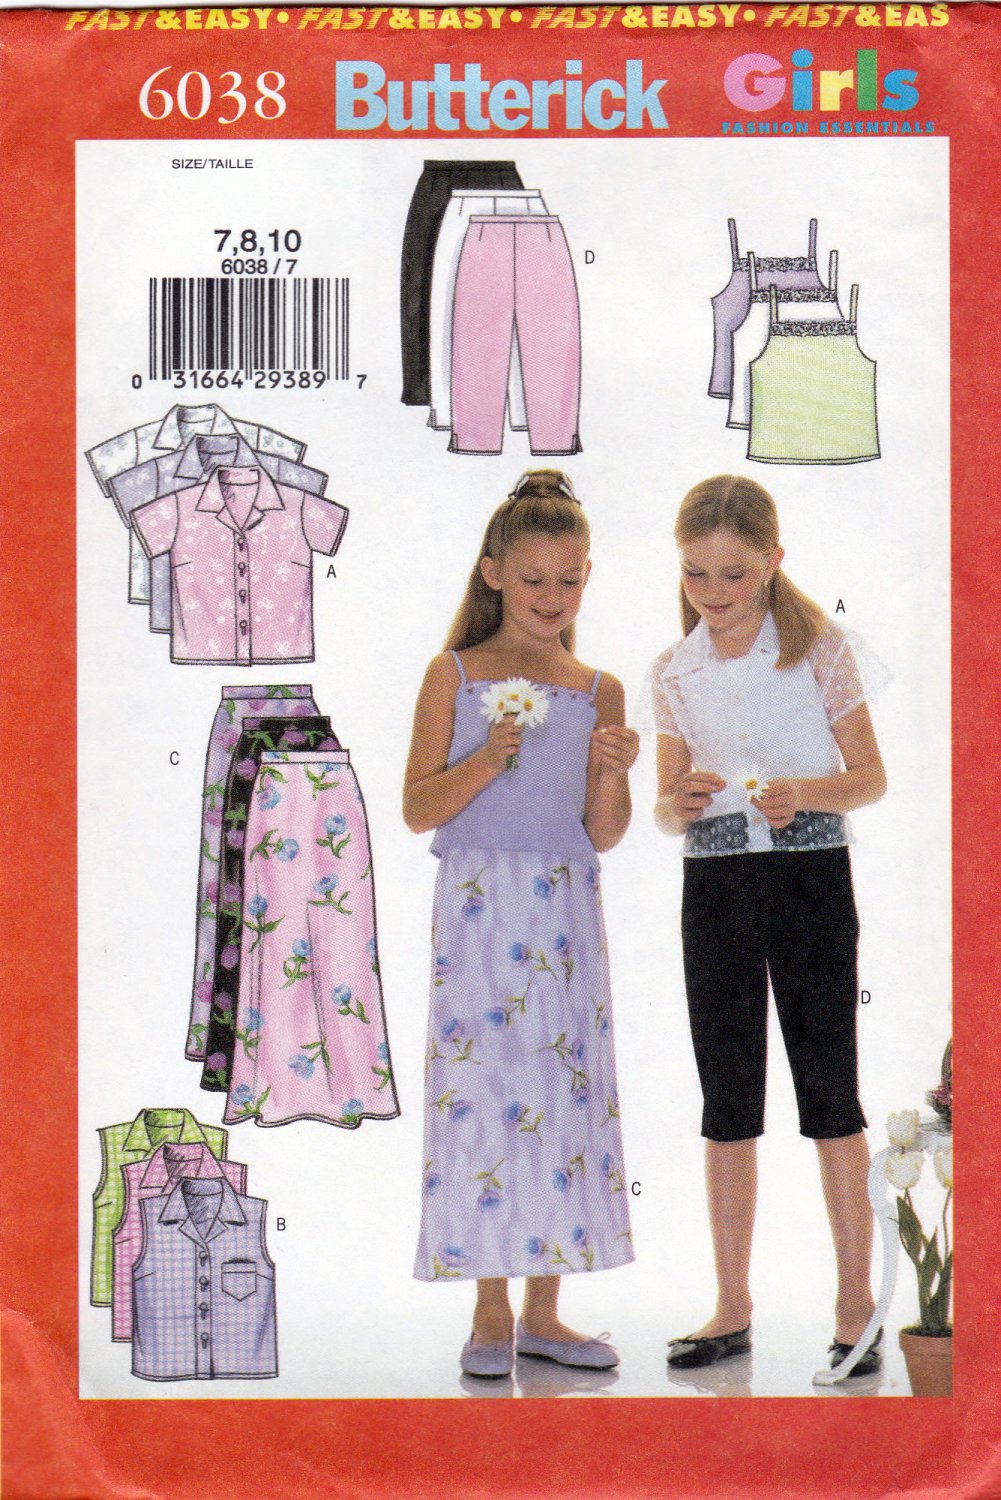 Butterick 6038 B6038 Girls Sewing Pattern Childrens Shirt Camisole Skirt Pant Sizes 7-8-10 Easy